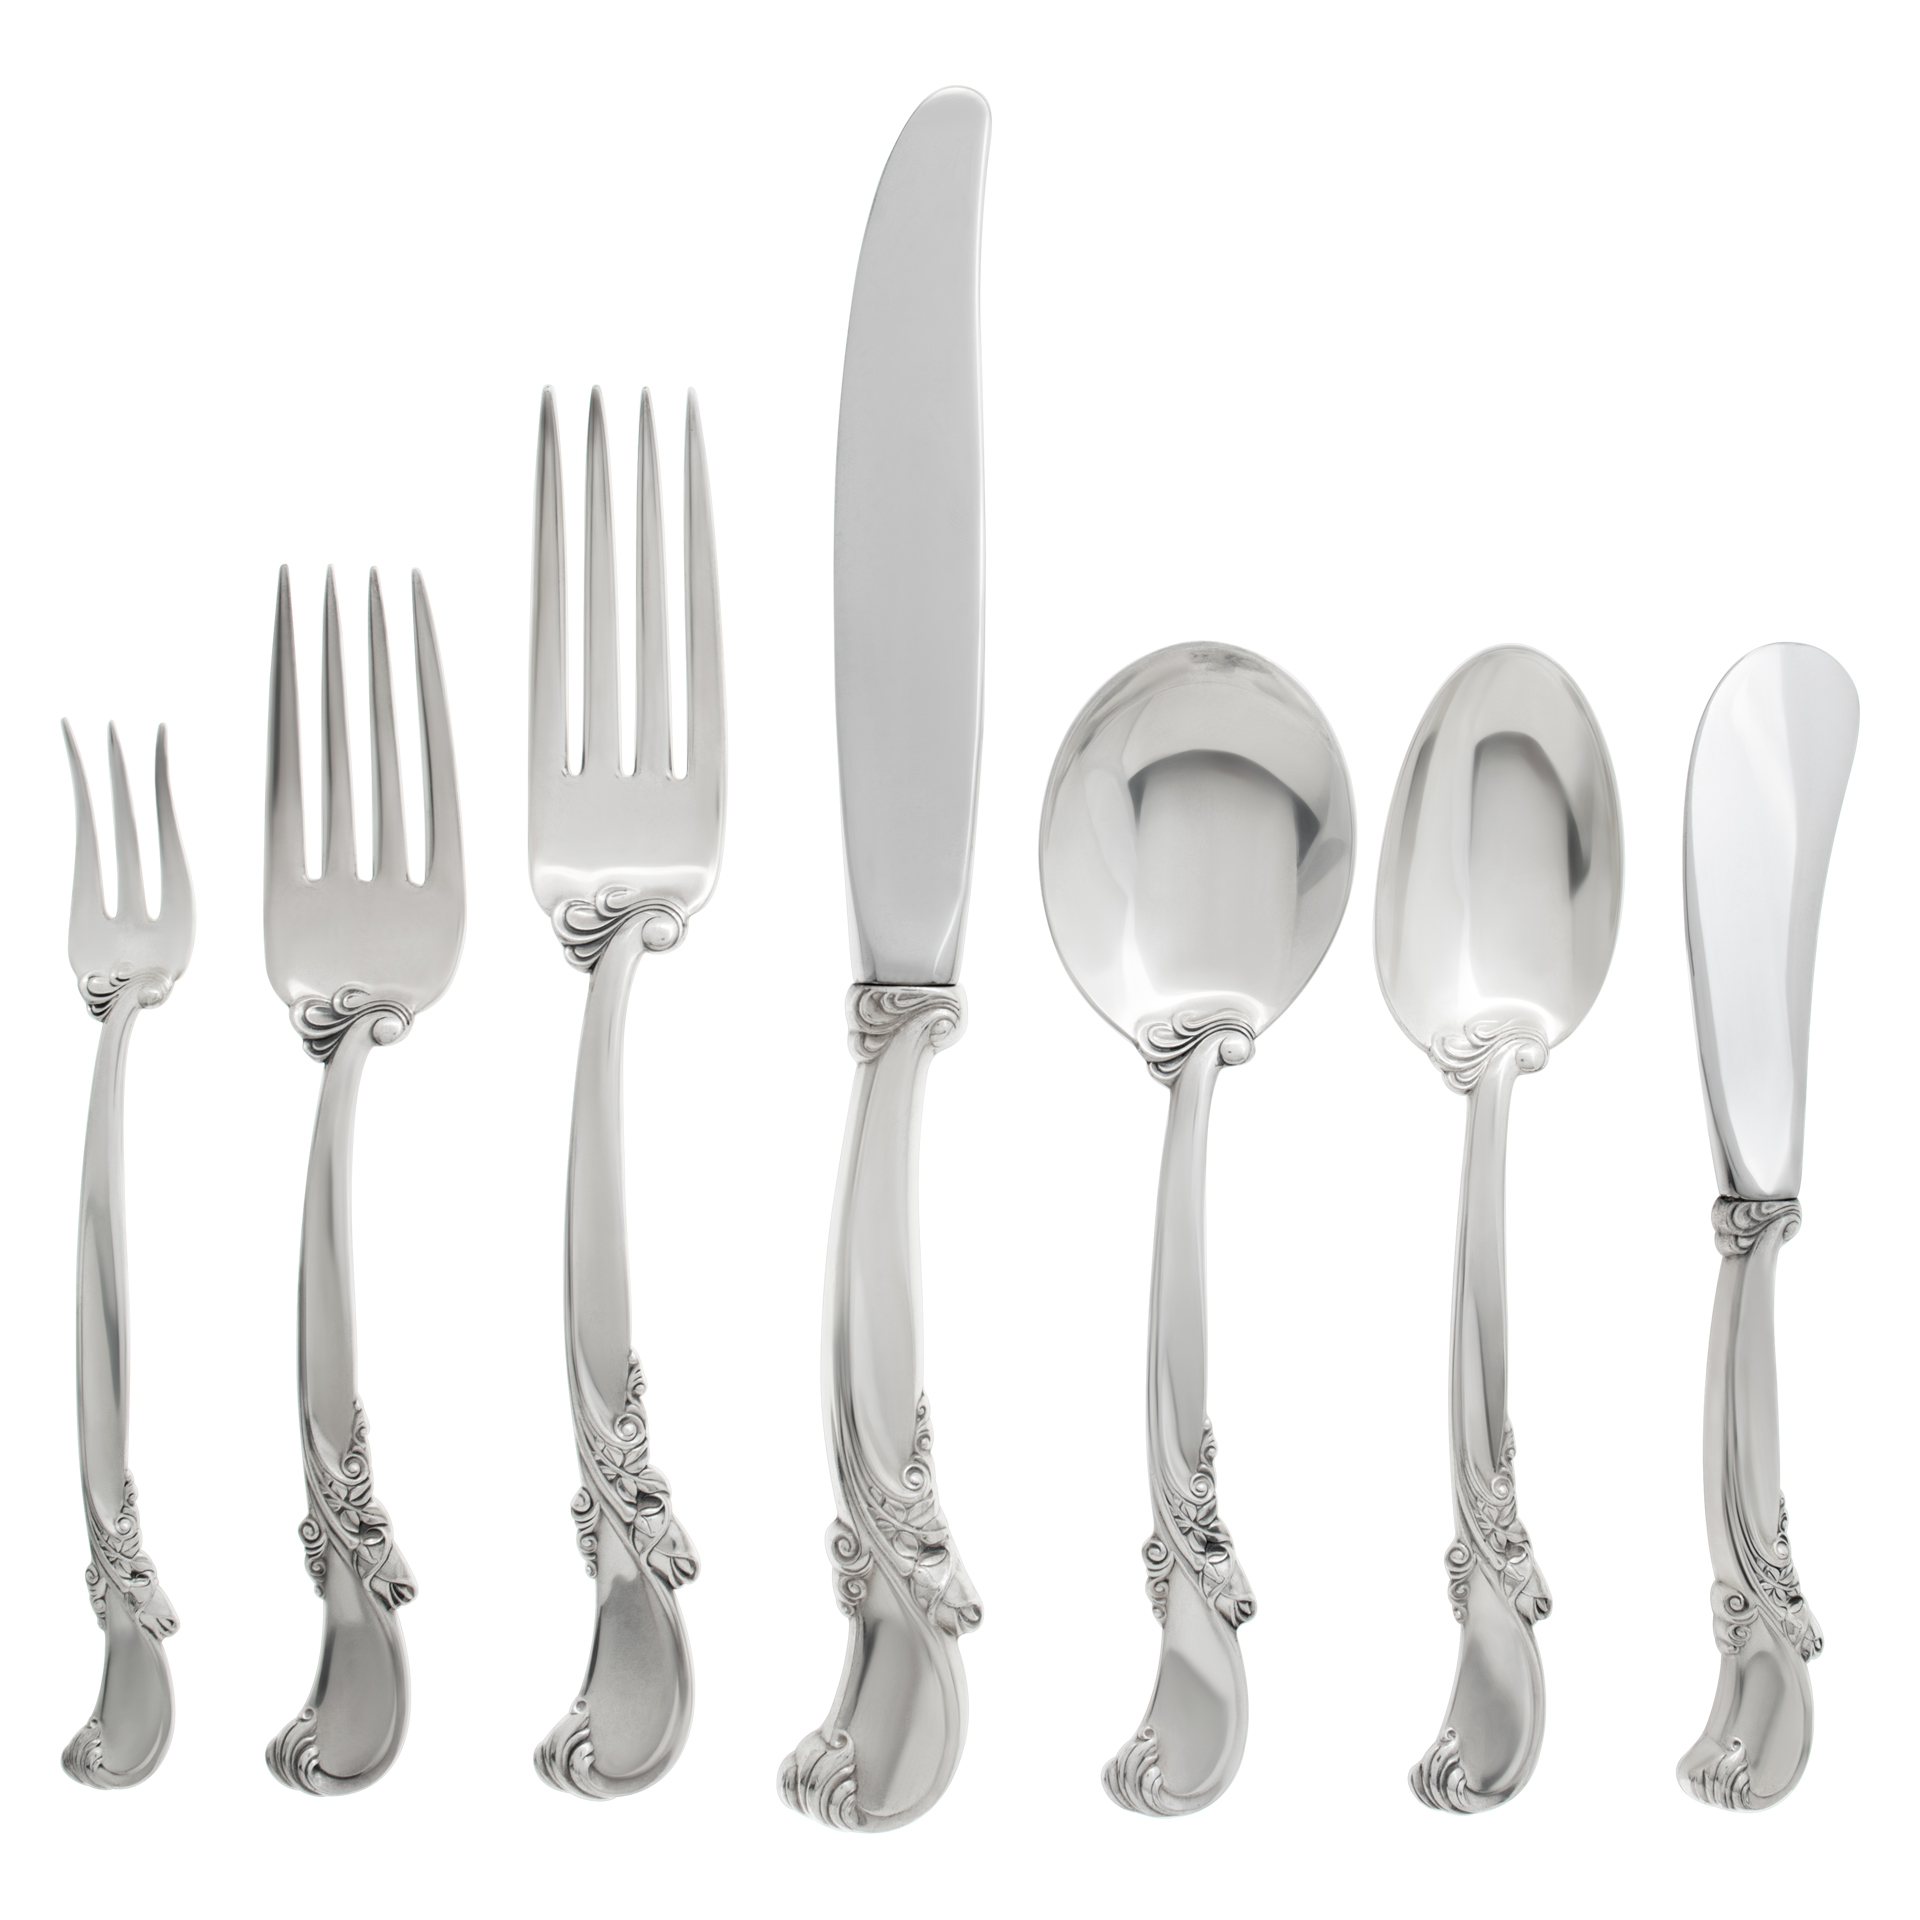 WALTZ OF SPRING, 74 pieces, sterling silver flatware set, patented by Wallace in 1952. 6 place setting for 12 + 2 serving pieces. image 1